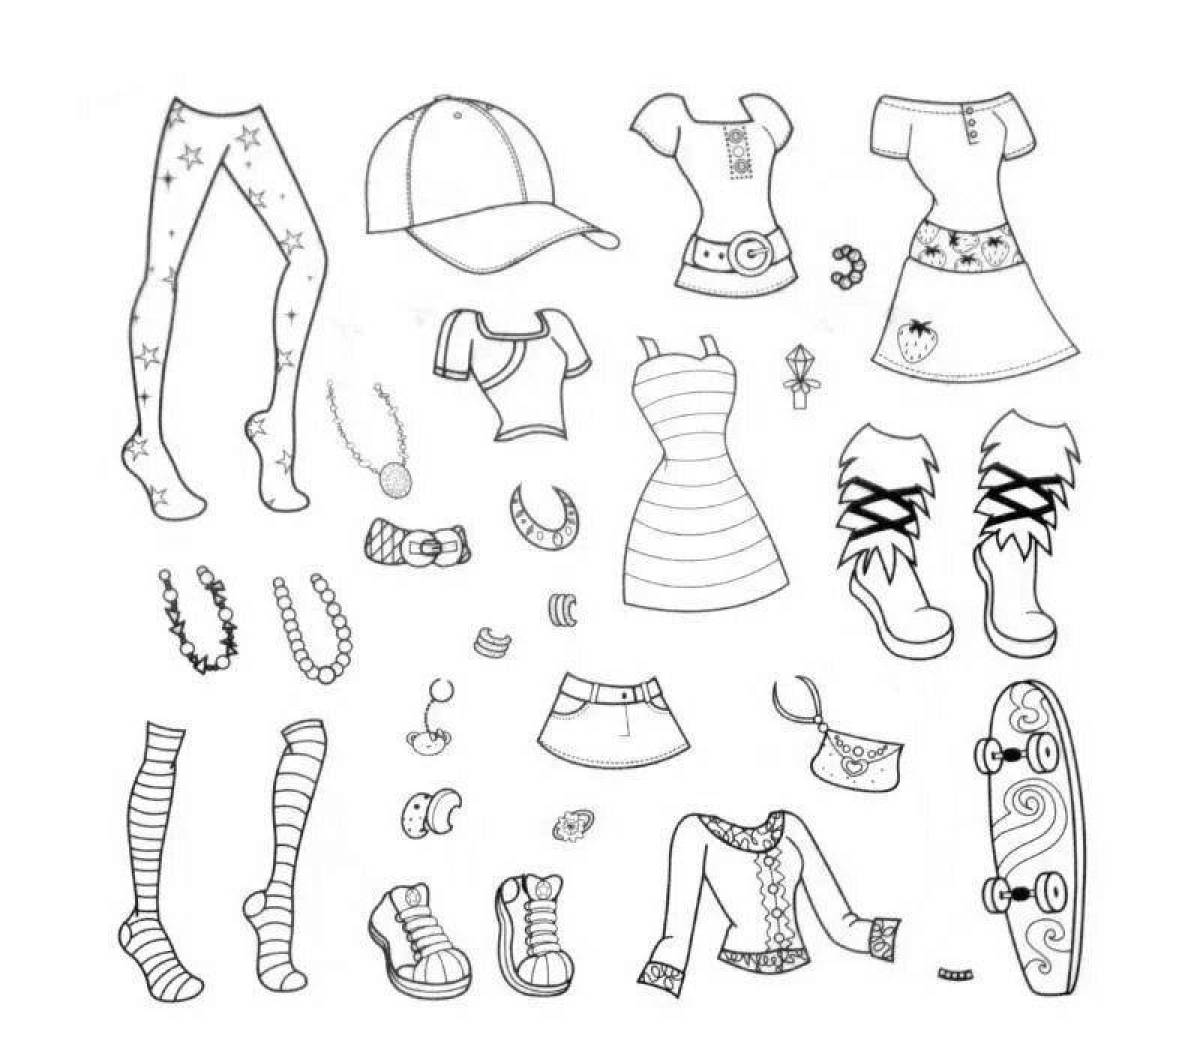 Awesome gacha clothes coloring page